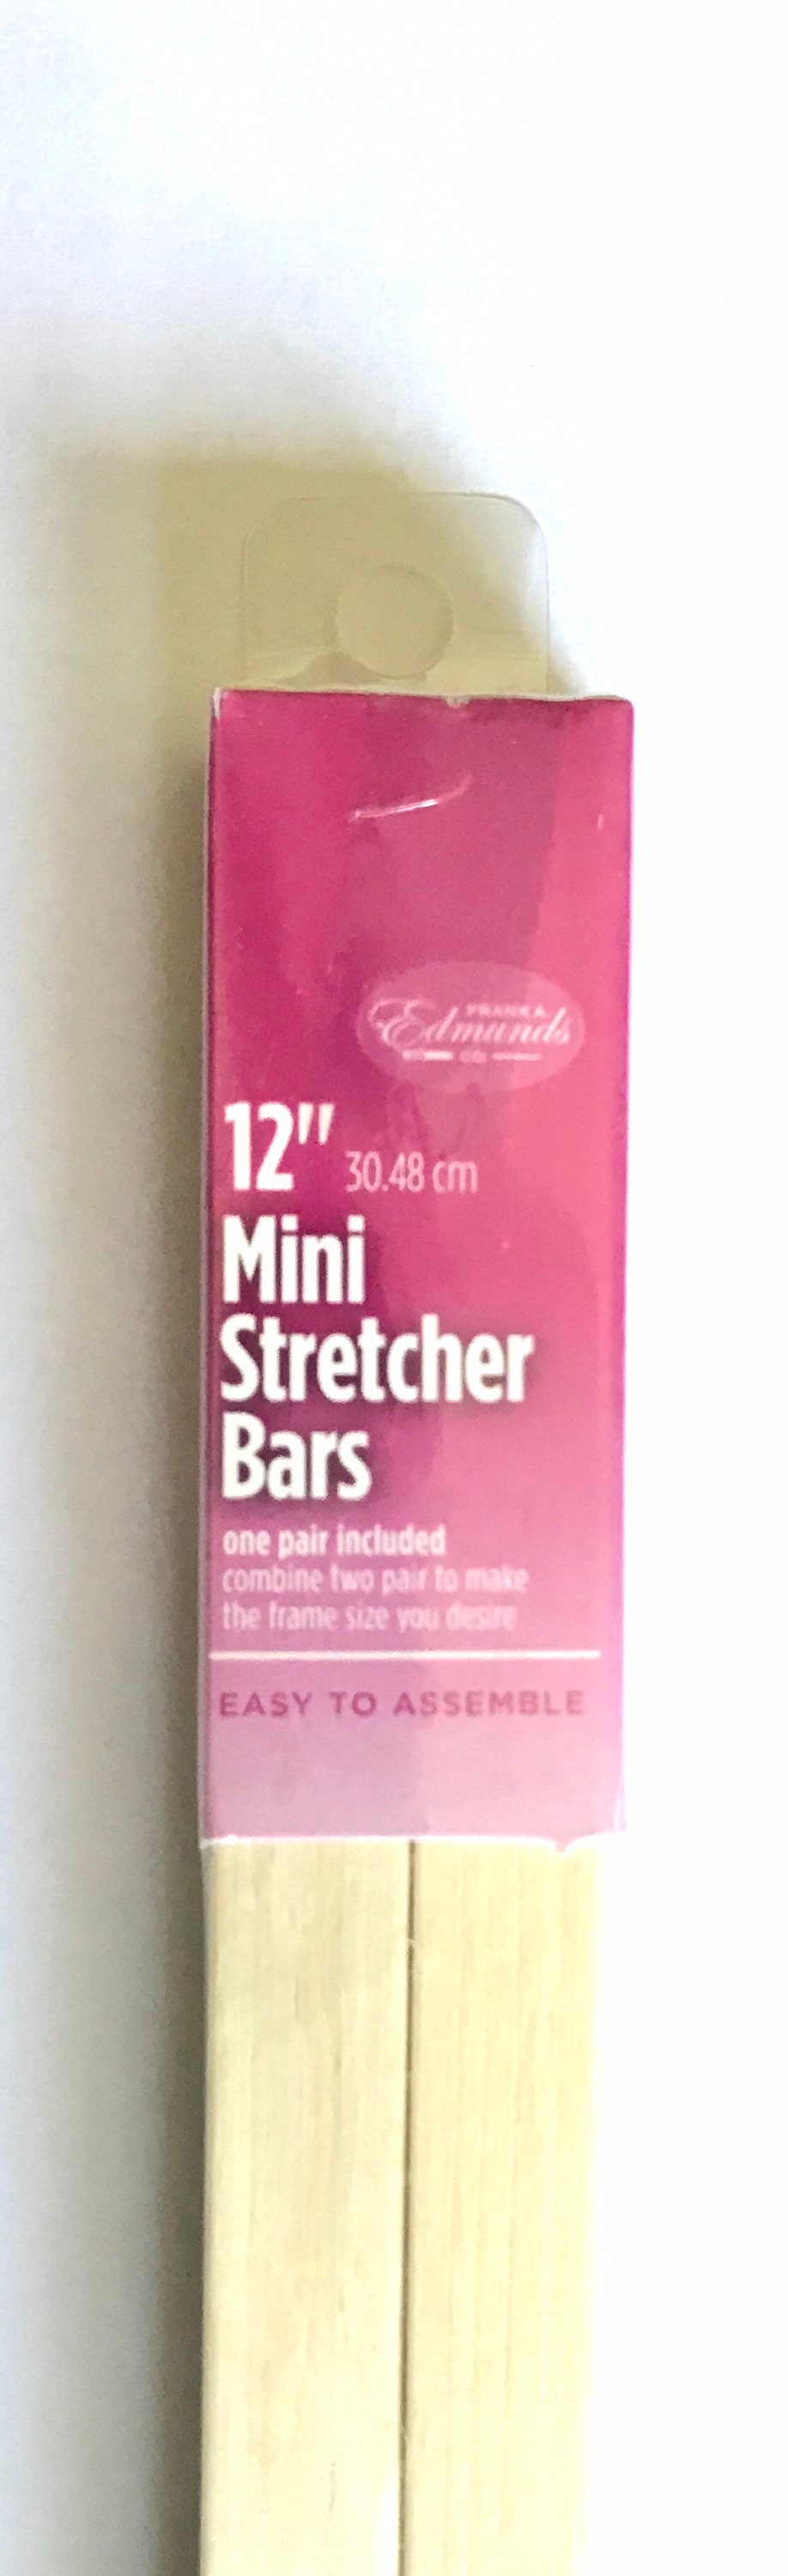 Edmunds 2008 Mini Stretcher Bars for Needle Art, 8 by 1/2-Inch